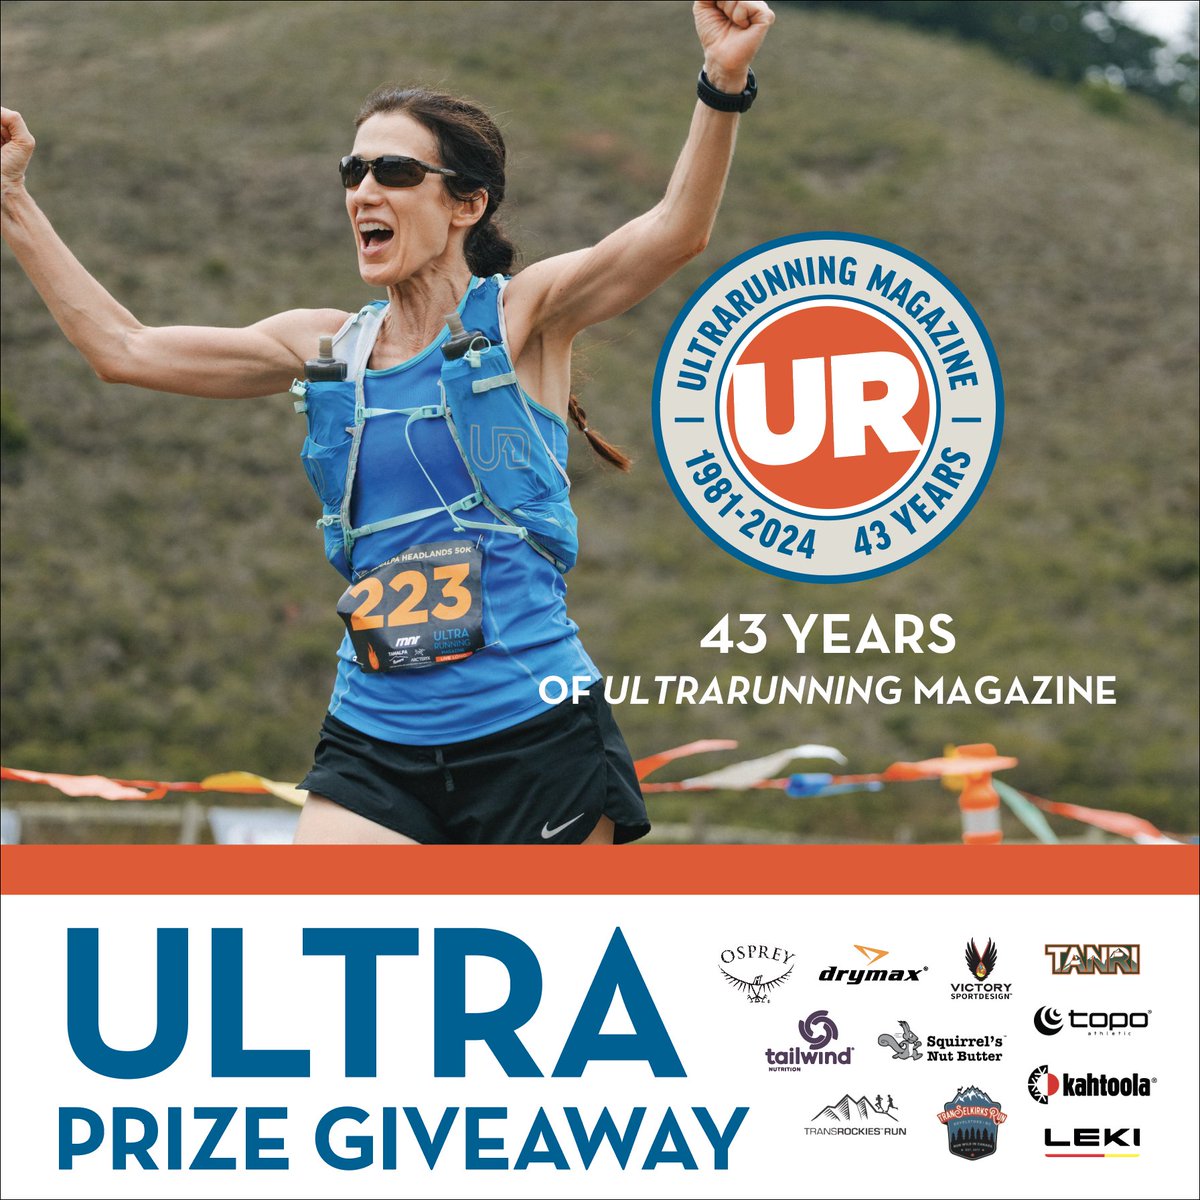 🎉 Our Anniversary Prize Giveaway is ON! We’re giving away TWO “ultra” prize packages worth over $4,500 to two lucky subscribers. ✅ How to enter: Subscribe or renew your subscription to UltraRunning Magazine in the month of April. ➡️ ultrarunning.com/win-ultrarunni…